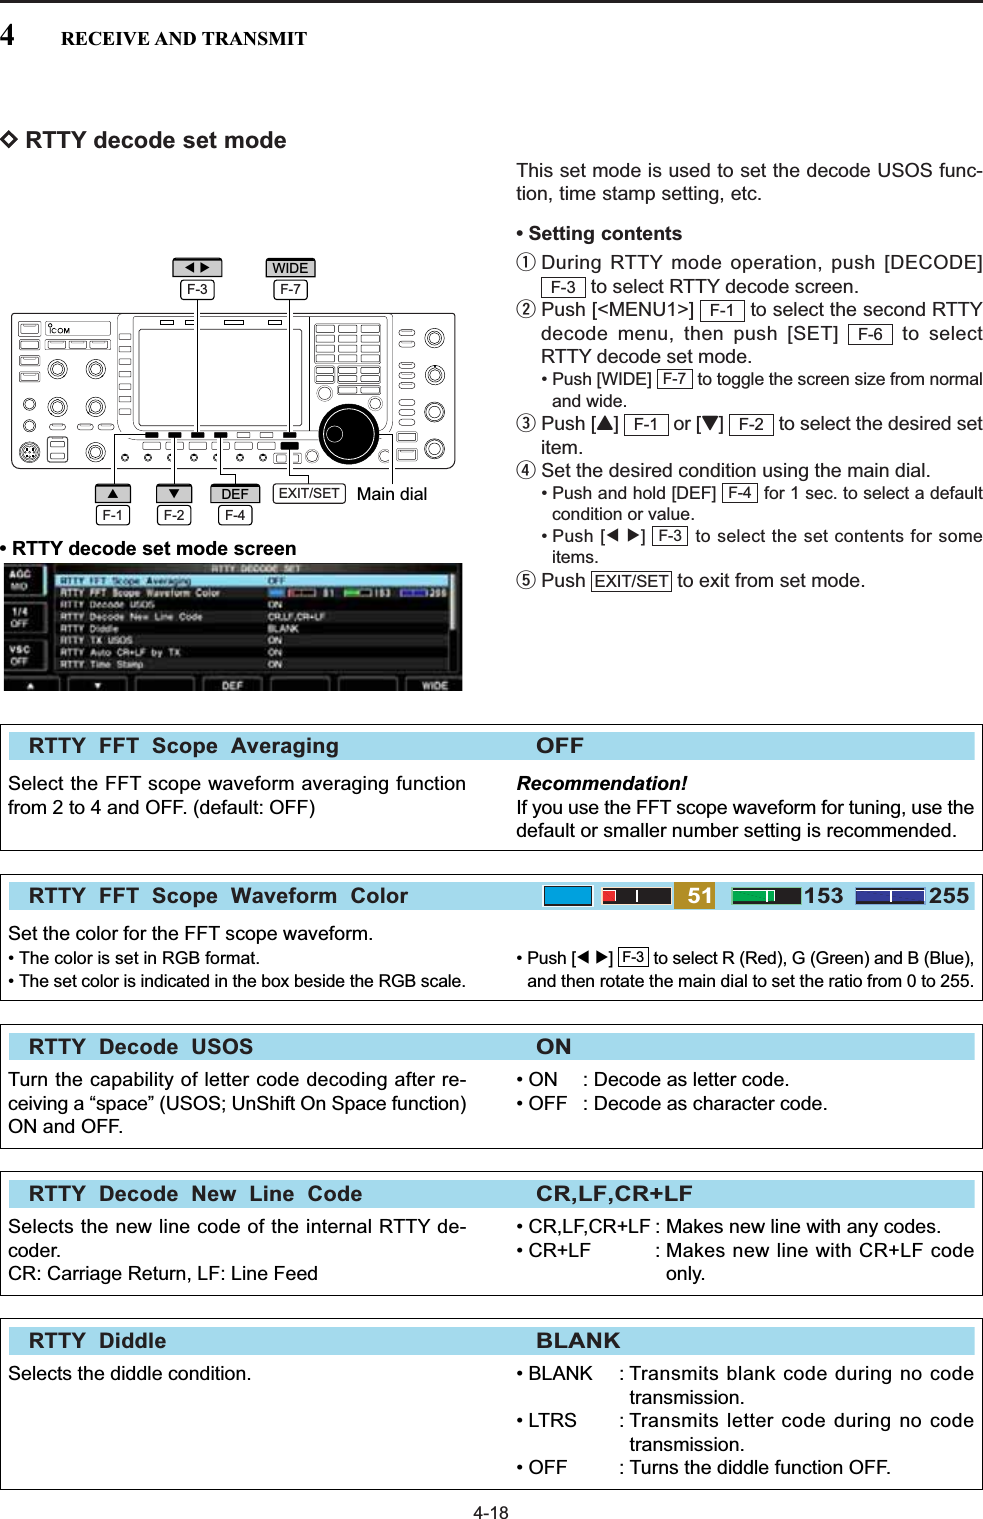 4-18DRTTY decode set modeThis set mode is used to set the decode USOS func-tion, time stamp setting, etc.• Setting contentsqDuring RTTY mode operation, push [DECODE]to select RTTY decode screen.wPush [&lt;MENU1&gt;]  to select the second RTTYdecode menu, then push [SET]  to selectRTTY decode set mode.• Push [WIDE]  to toggle the screen size from normaland wide.ePush [Y] or [Z]  to select the desired setitem.rSet the desired condition using the main dial.• Push and hold [DEF]  for 1 sec. to select a defaultcondition or value.• Push [Ω≈]  to select the set contents for someitems.tPush  to exit from set mode.EXIT/SETF-3F-4F-2F-1F-7F-6F-1F-3F-3 F-7WIDEΩ ≈Main dialEXIT/SETDEFF-1∫F-2√F-44RECEIVE AND TRANSMIT• RTTY decode set mode screenTurn the capability of letter code decoding after re-ceiving a “space” (USOS; UnShift On Space function)ON and OFF.• ON : Decode as letter code.• OFF : Decode as character code.Selects the new line code of the internal RTTY de-coder.CR: Carriage Return, LF: Line Feed• CR,LF,CR+LF : Makes new line with any codes.• CR+LF : Makes new line with CR+LF codeonly.RTTY  Decode  USOSONRTTY  Decode  New  Line  CodeCR,LF,CR+LFSelects the diddle condition. • BLANK : Transmits blank code during no codetransmission.• LTRS : Transmits letter code during no codetransmission.• OFF : Turns the diddle function OFF.RTTY  DiddleBLANKSelect the FFT scope waveform averaging functionfrom 2 to 4 and OFF. (default: OFF)Recommendation!If you use the FFT scope waveform for tuning, use thedefault or smaller number setting is recommended.RTTY  FFT  Scope  AveragingOFFSet the color for the FFT scope waveform.• The color is set in RGB format.• The set color is indicated in the box beside the RGB scale.• Push [Ω≈]  to select R (Red), G (Green) and B (Blue),and then rotate the main dial to set the ratio from 0 to 255.F-3RTTY  FFT  Scope  Waveform  Color51 153 255